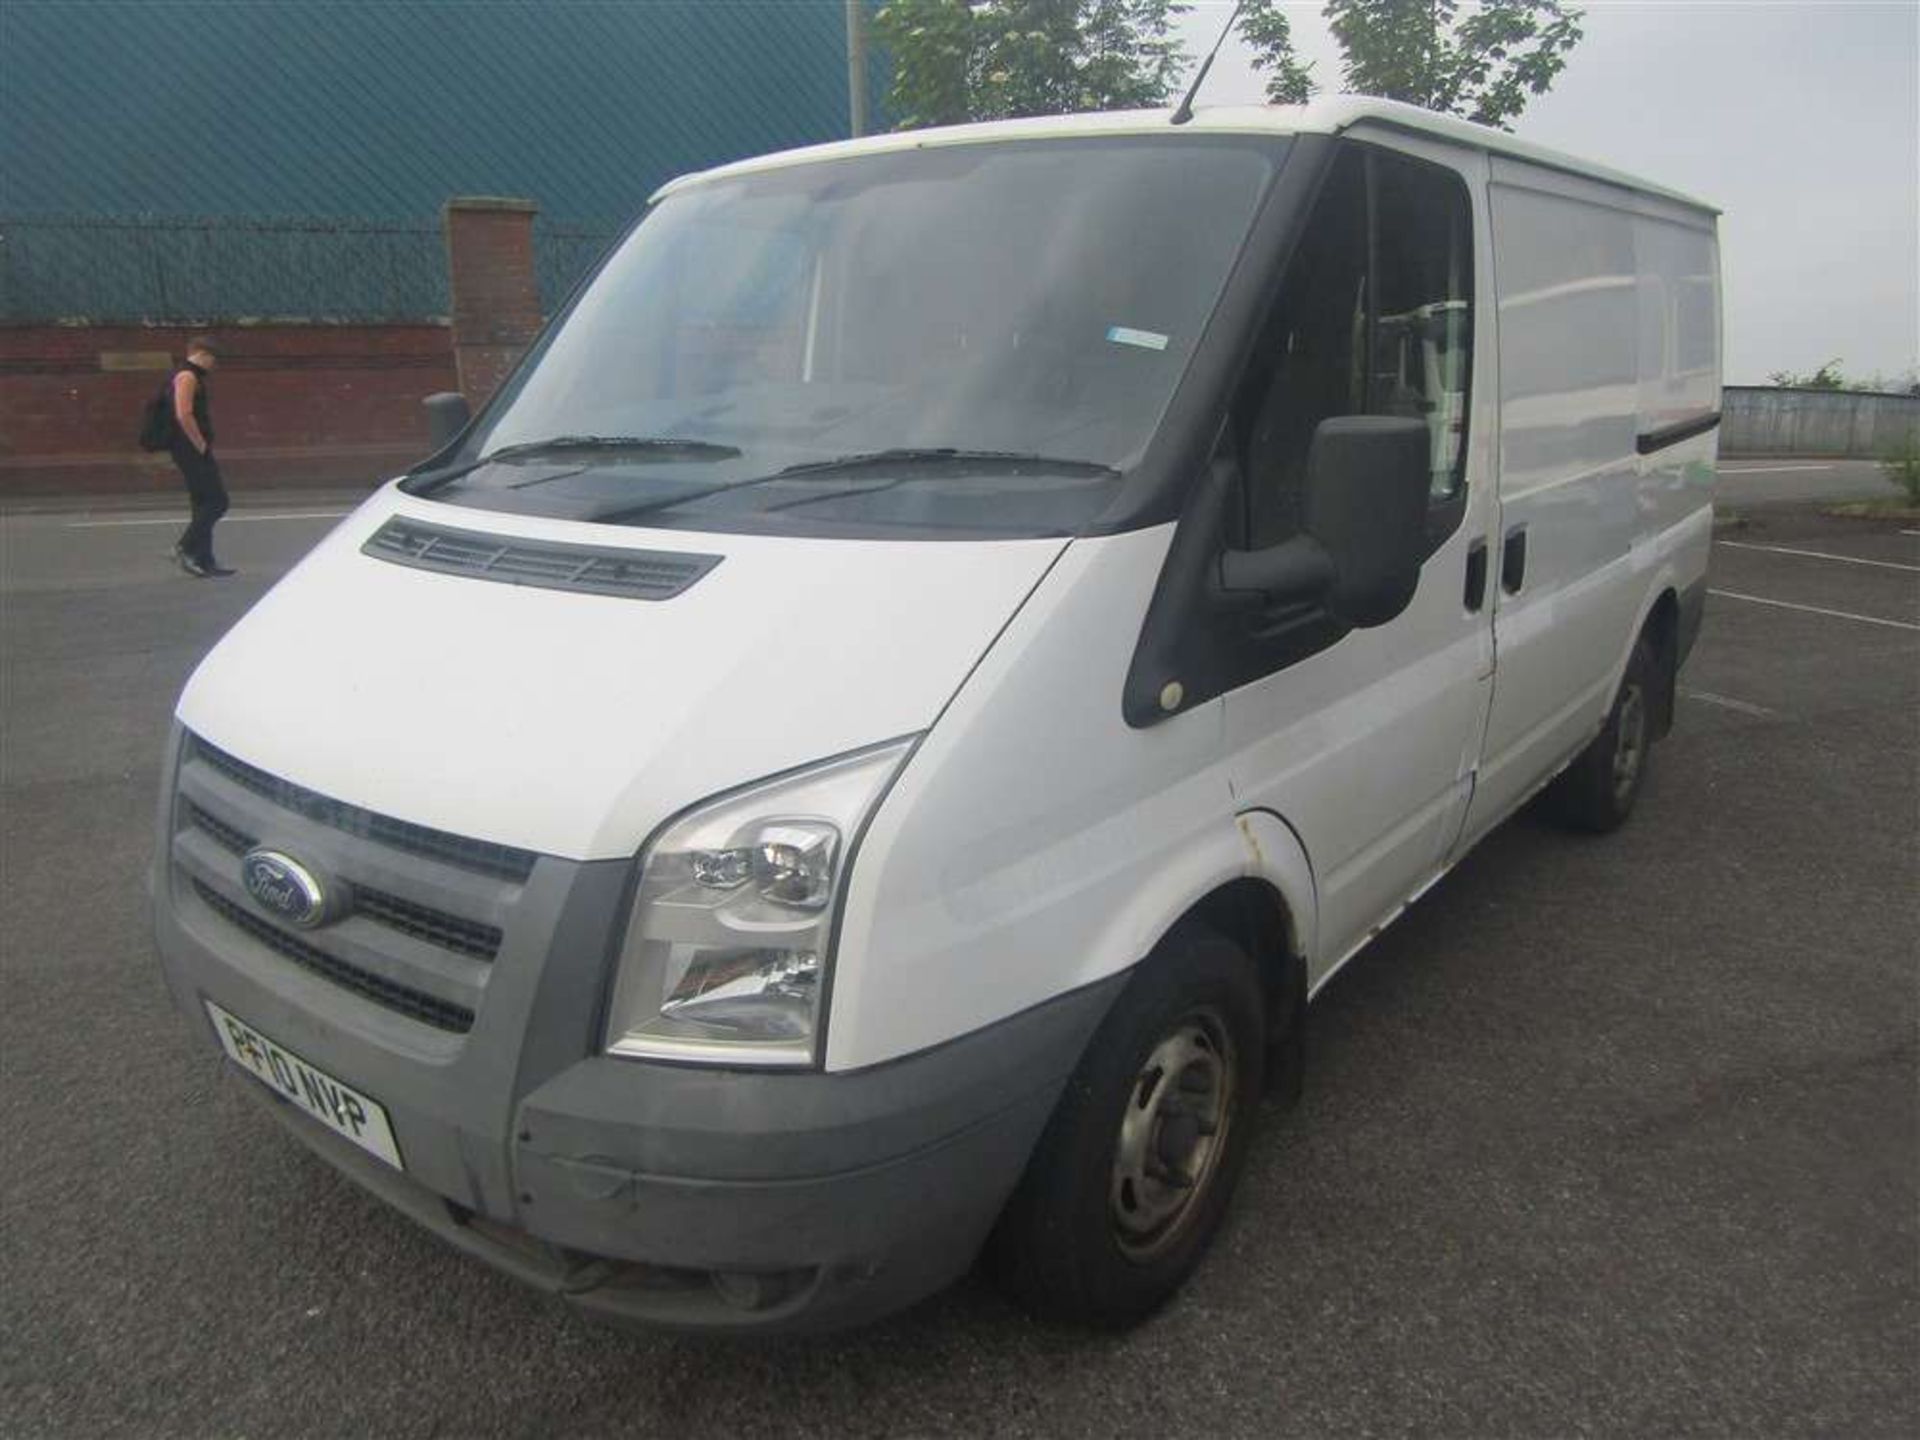 2010 10 reg Ford Transit 85 T280s FWD (Direct Council) - Image 2 of 7